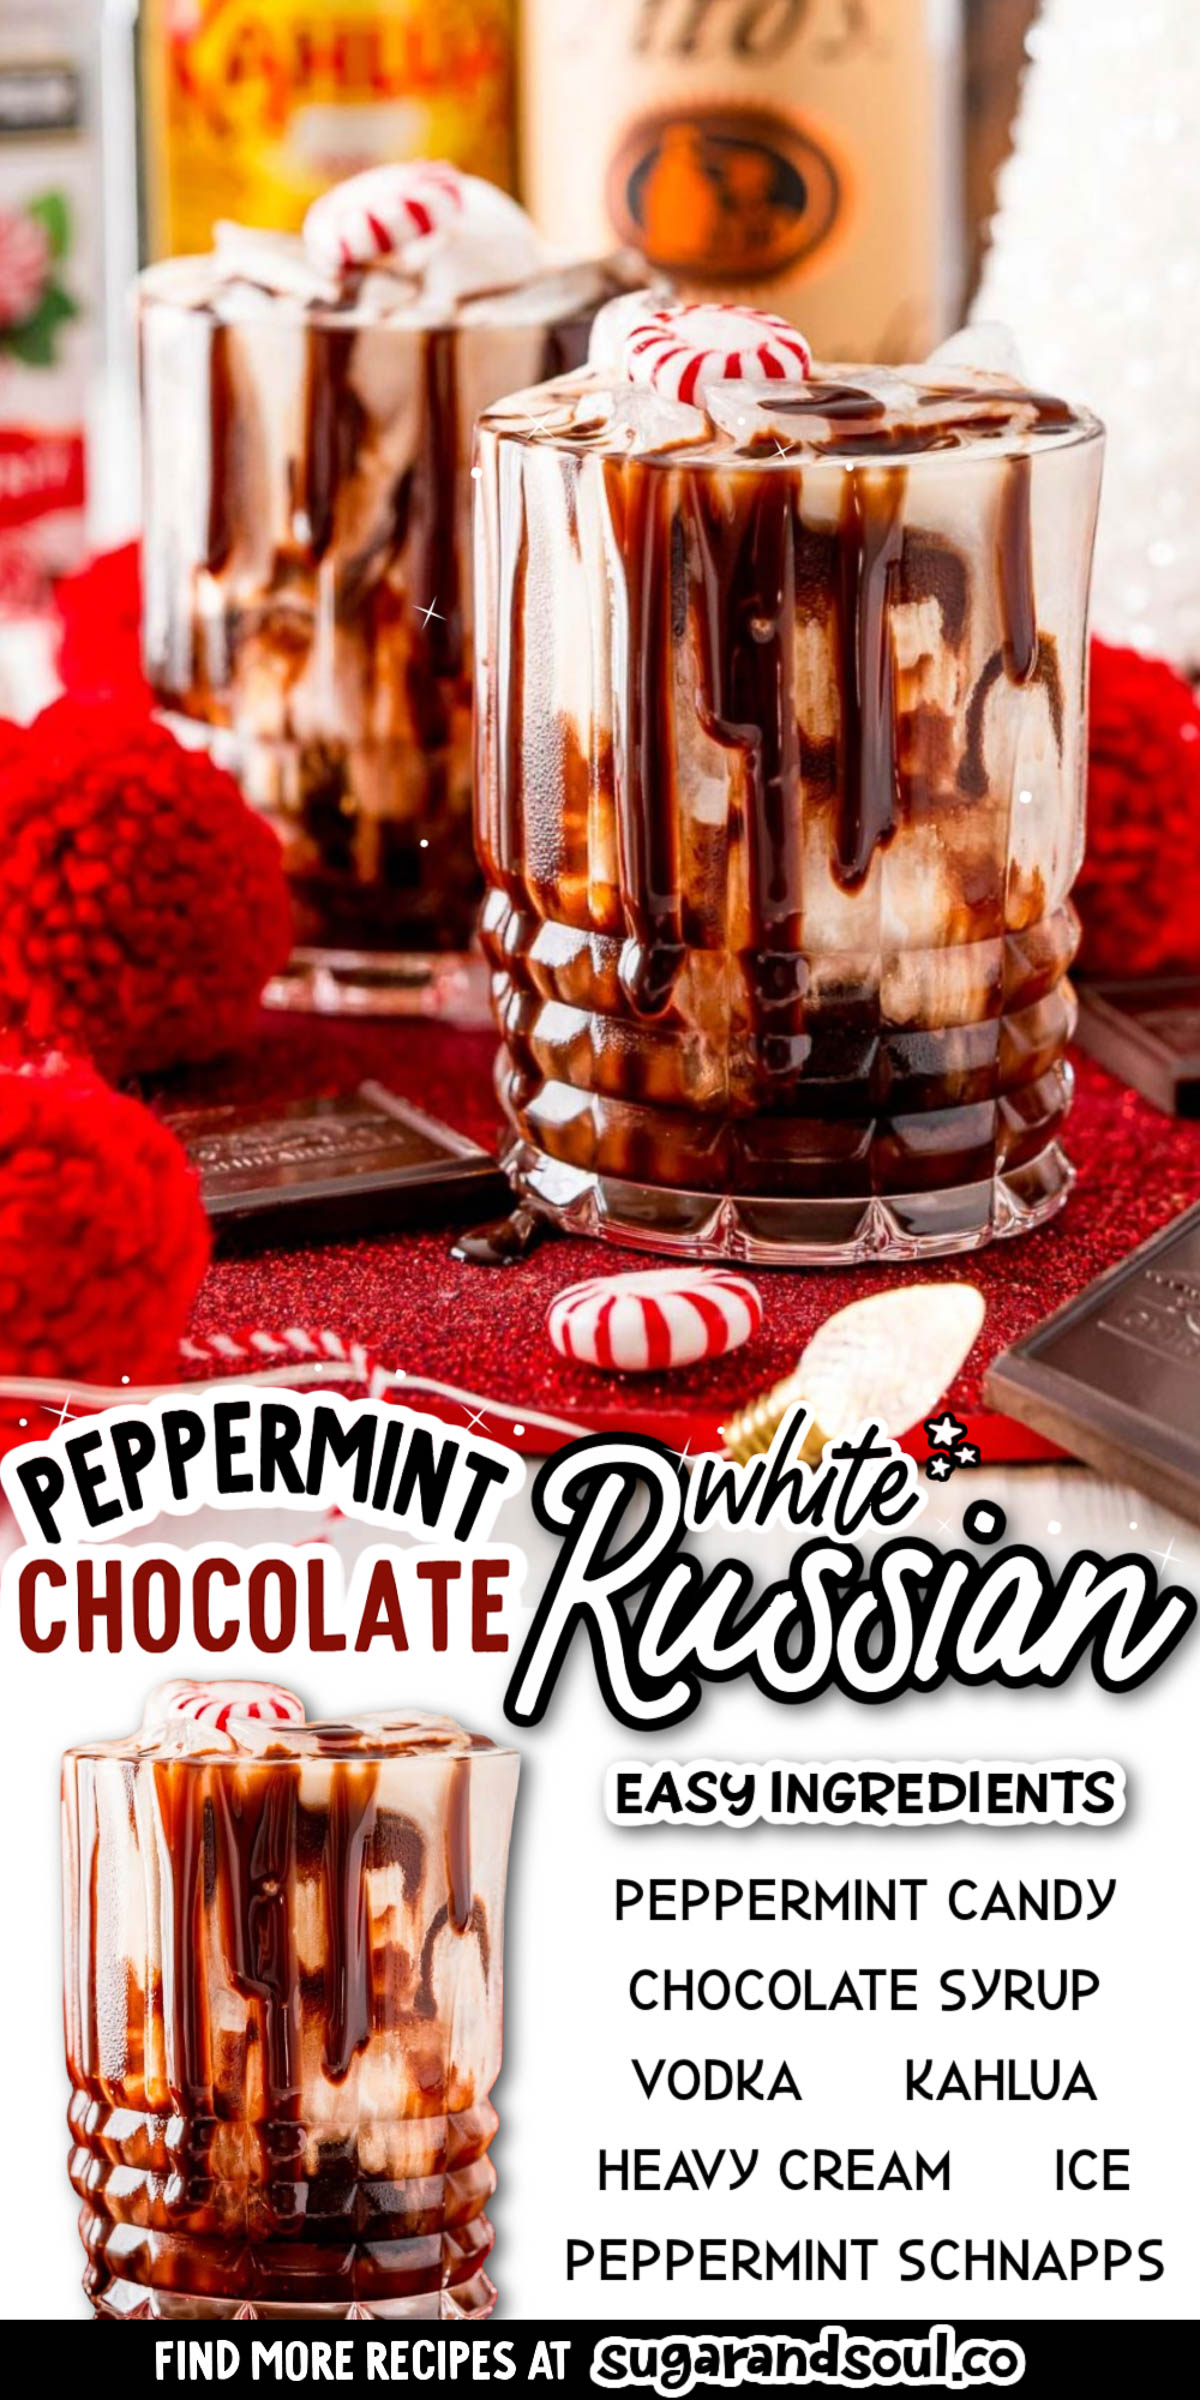 With a mixture of chocolate, cream, and liquor this Peppermint Chocolate White Russian is the perfect cocktail recipe to sip on during your next holiday gathering. Super easy to whip up and absolutely delicious. via @sugarandsoulco